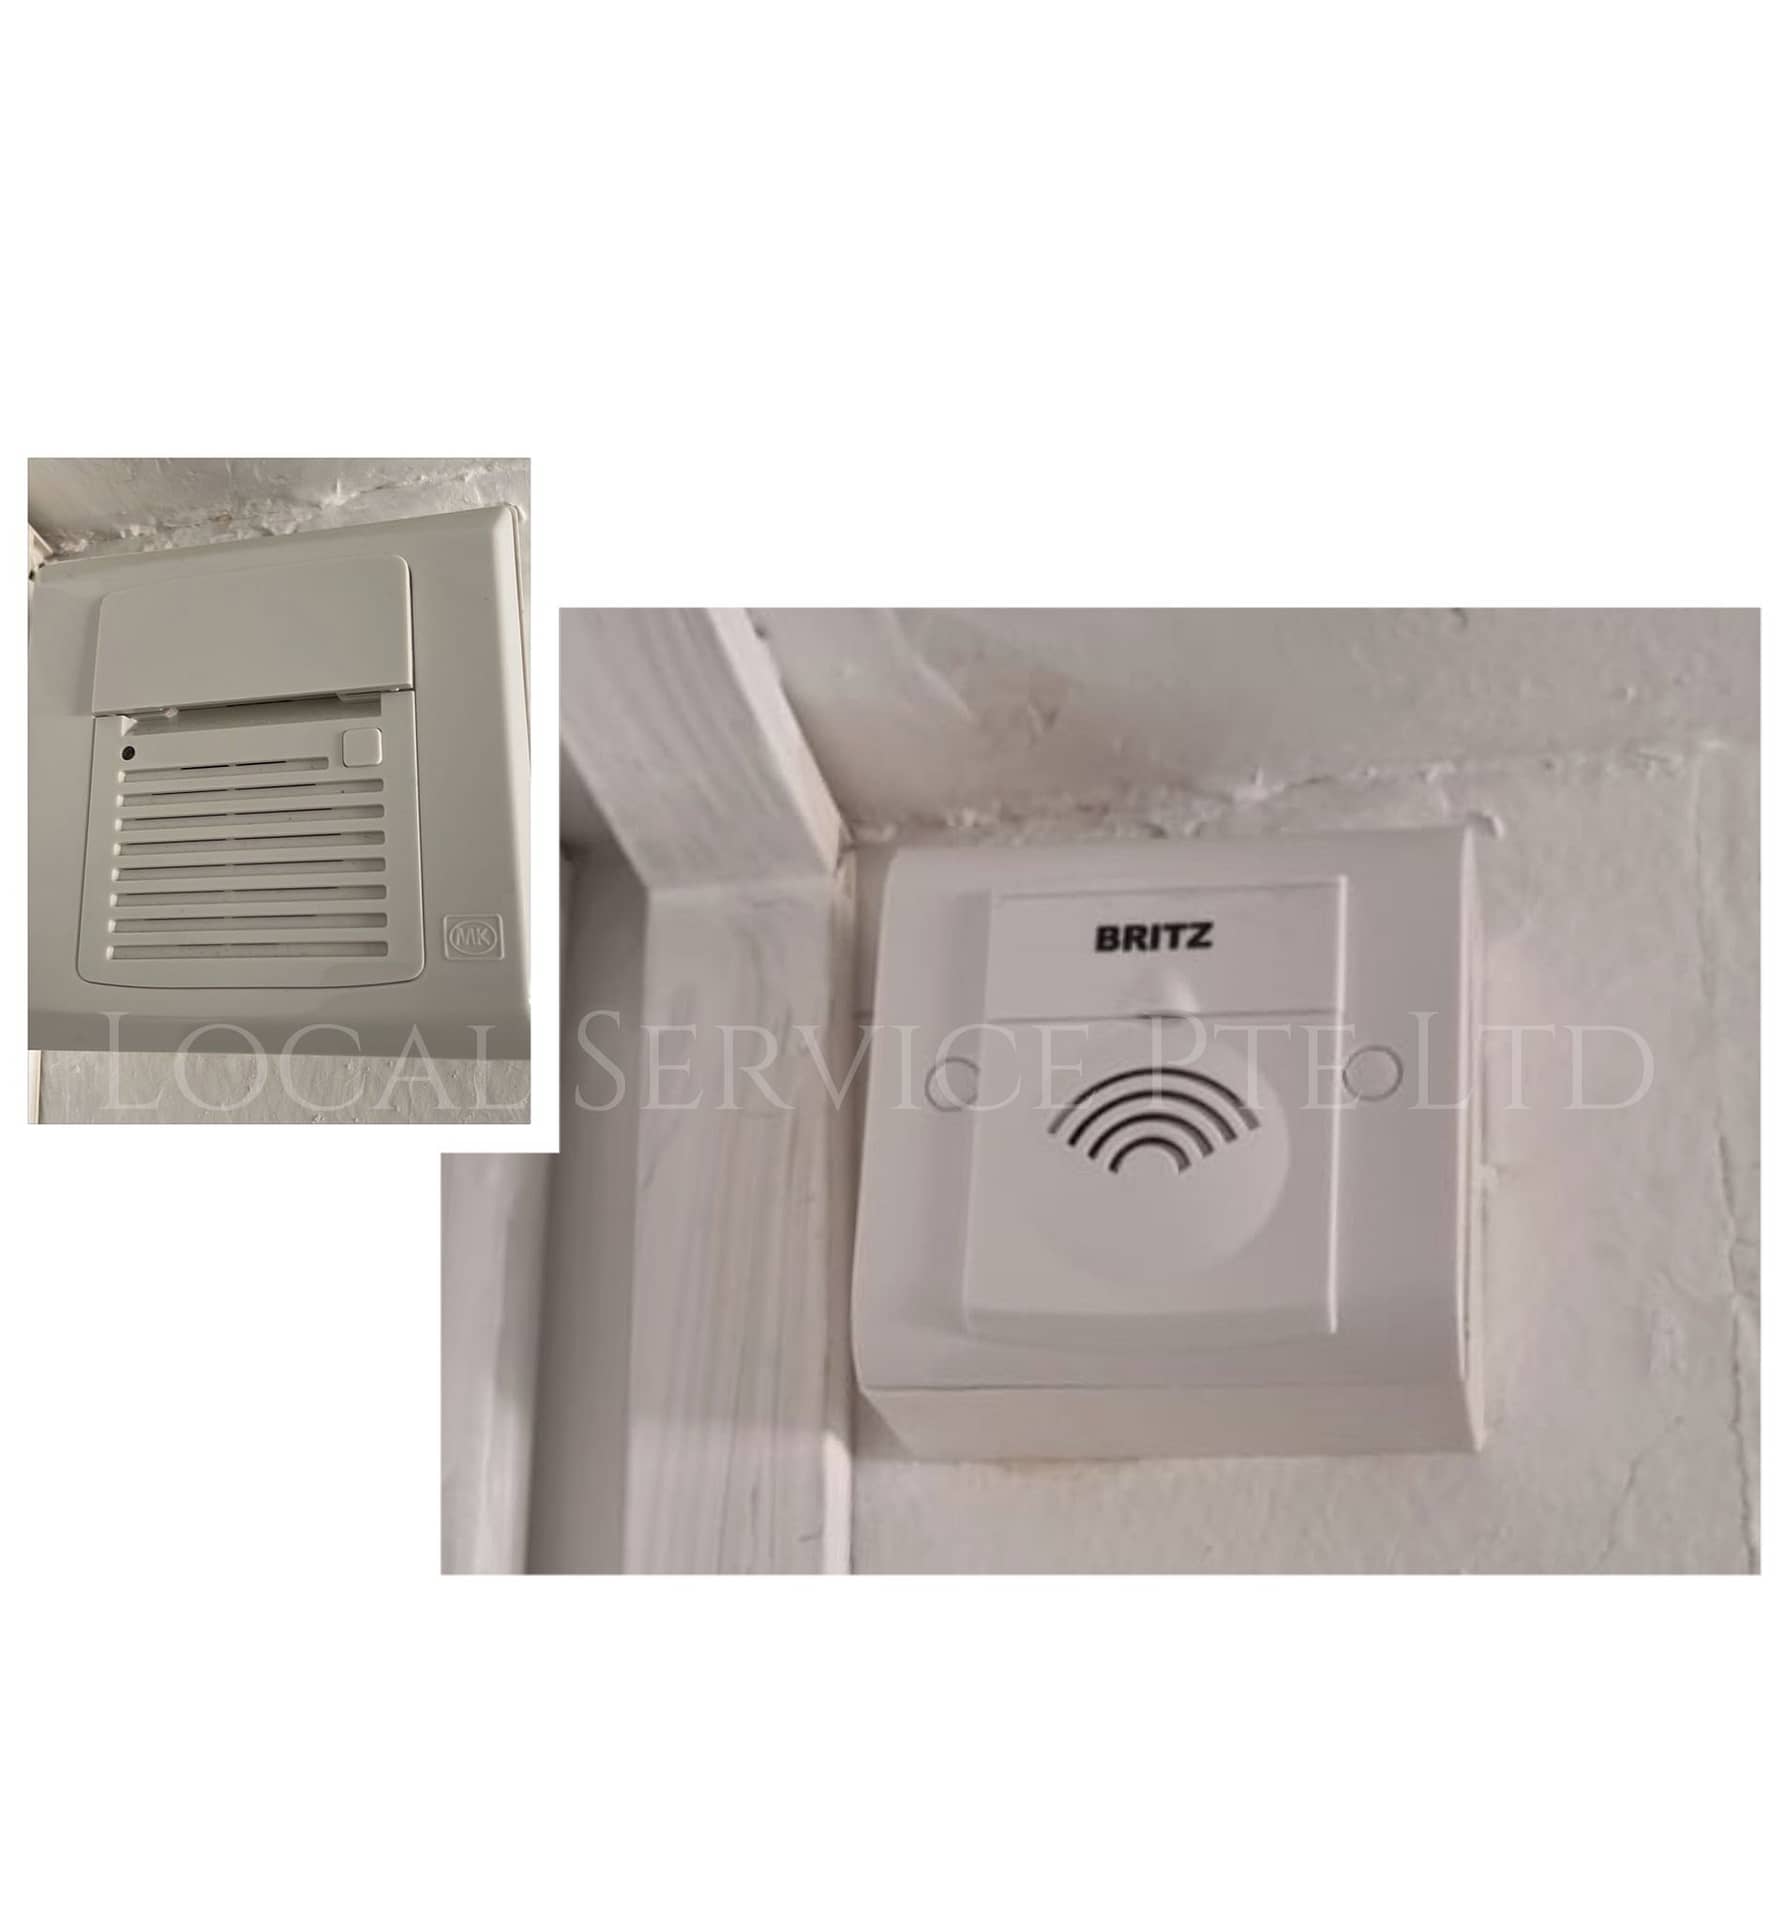 Supply And Replace Door Bell